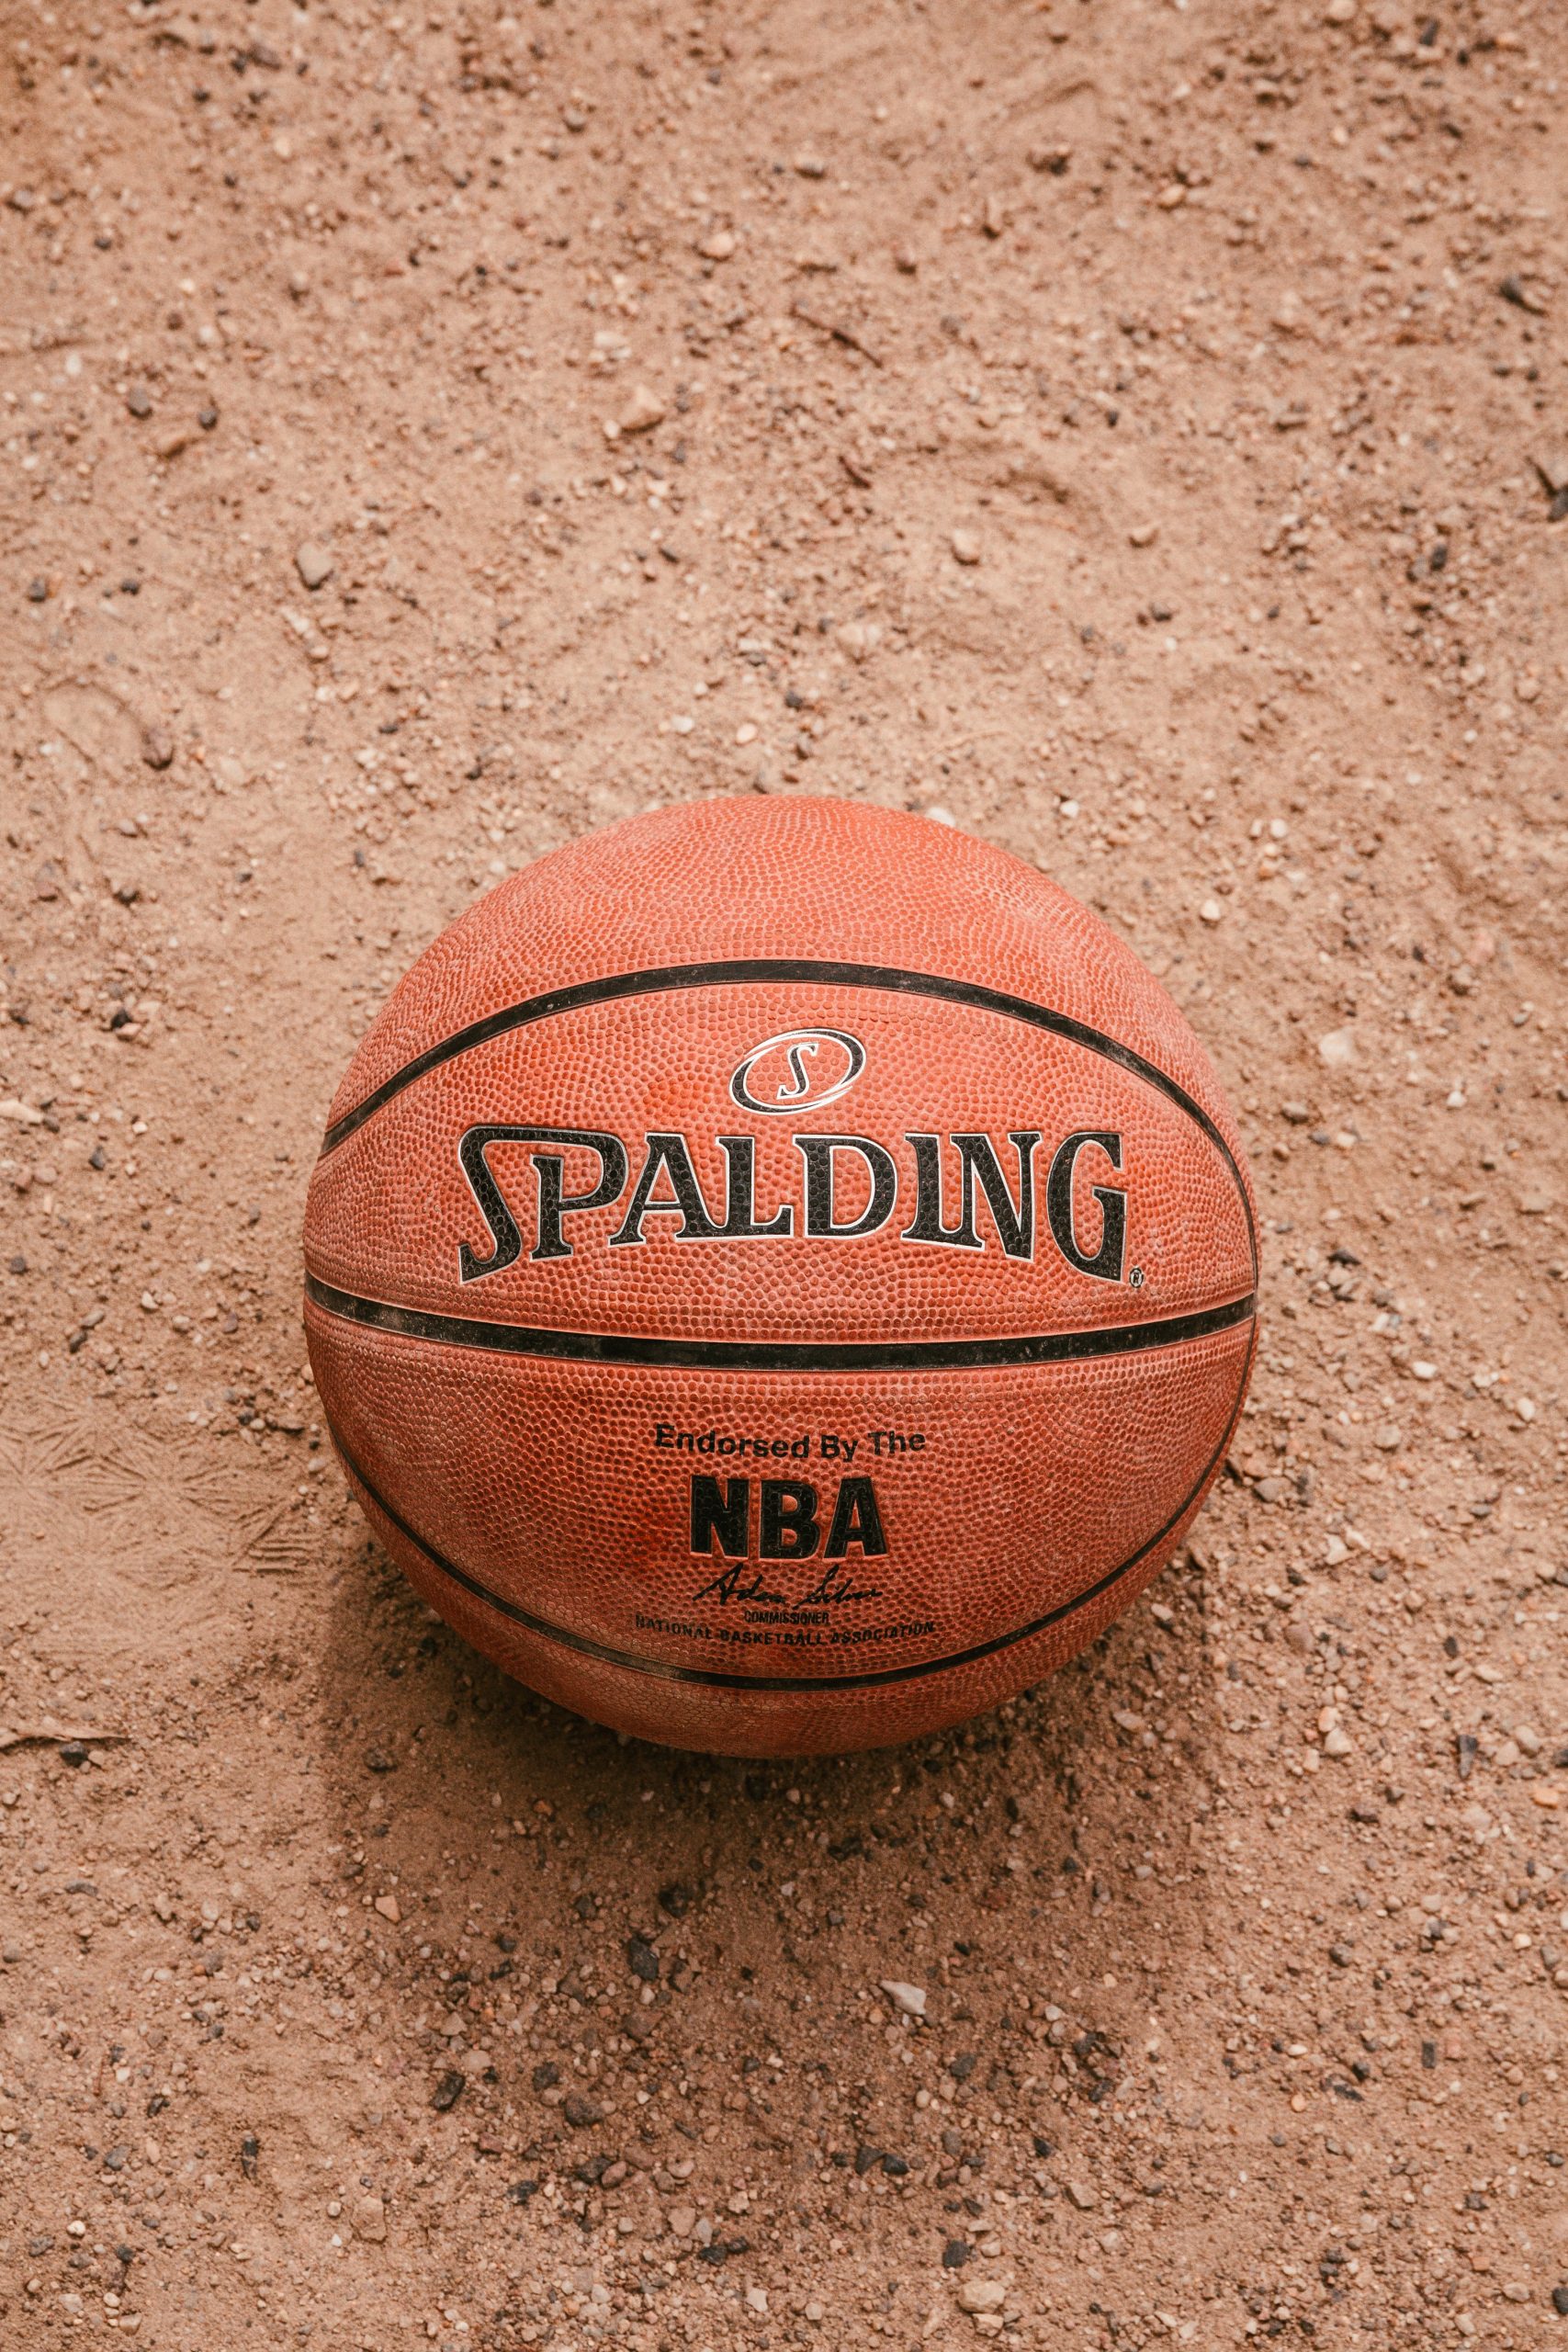 How to Deflate a Basketball – Our Step-by-Step Guide